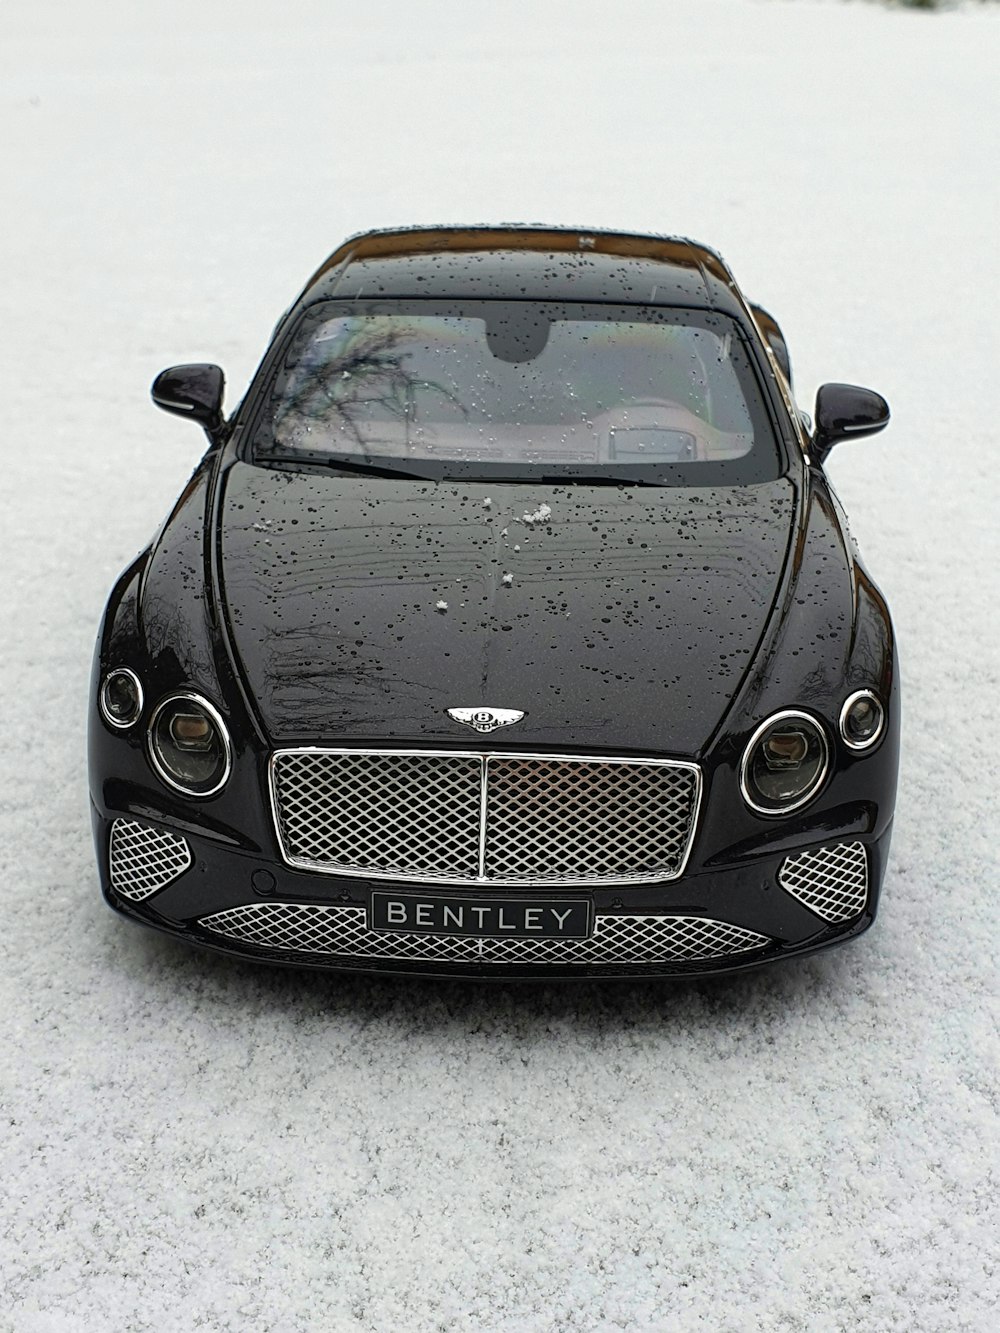 black mercedes benz c class on snow covered ground